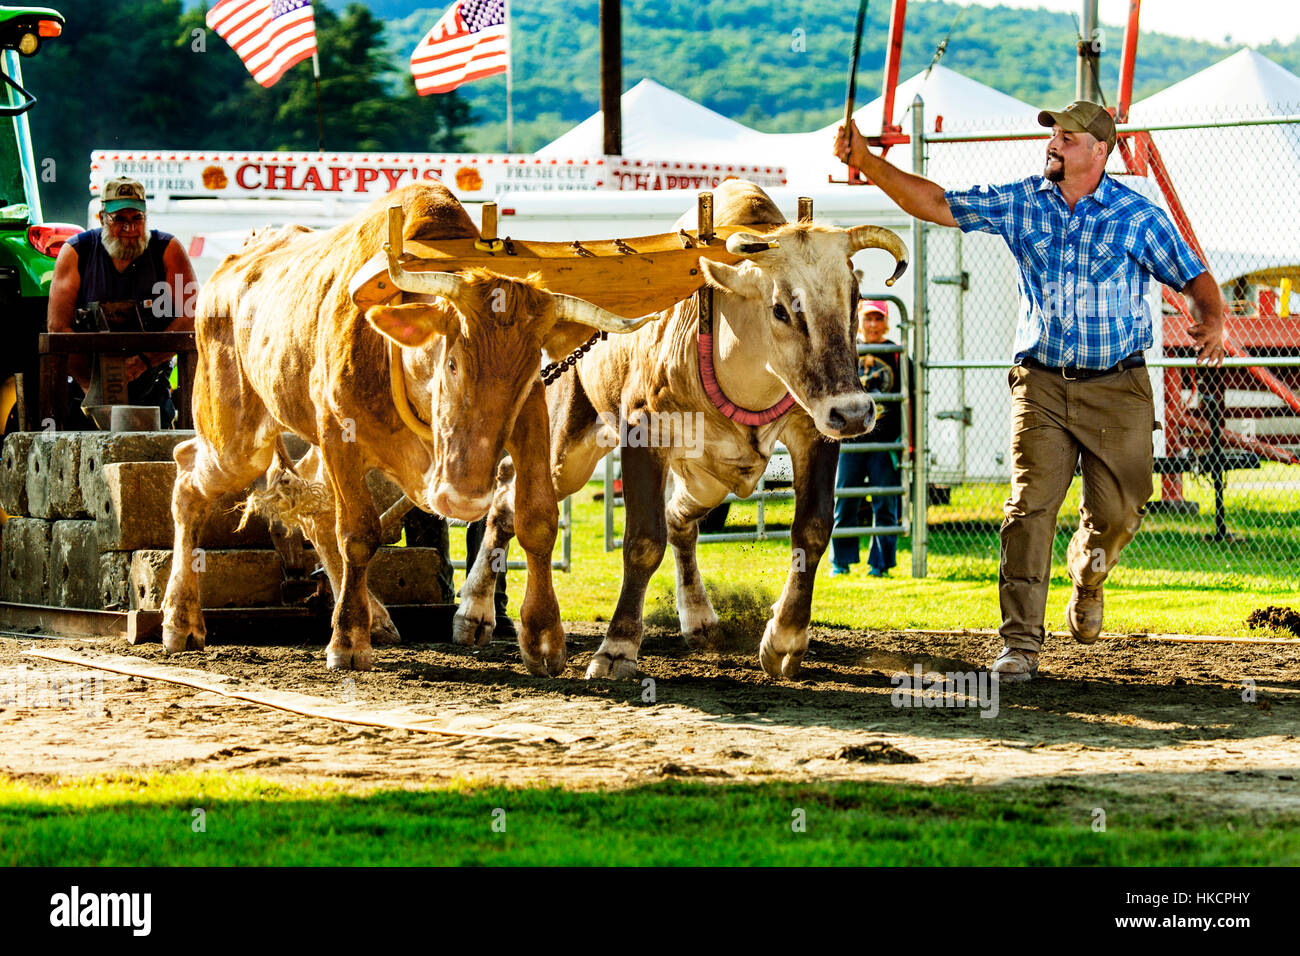 Draught oxen team pulling contest at the 2014 Connecticut Vally Fair at the fairgrounds in Bradford, Vermont, USA. Stock Photo